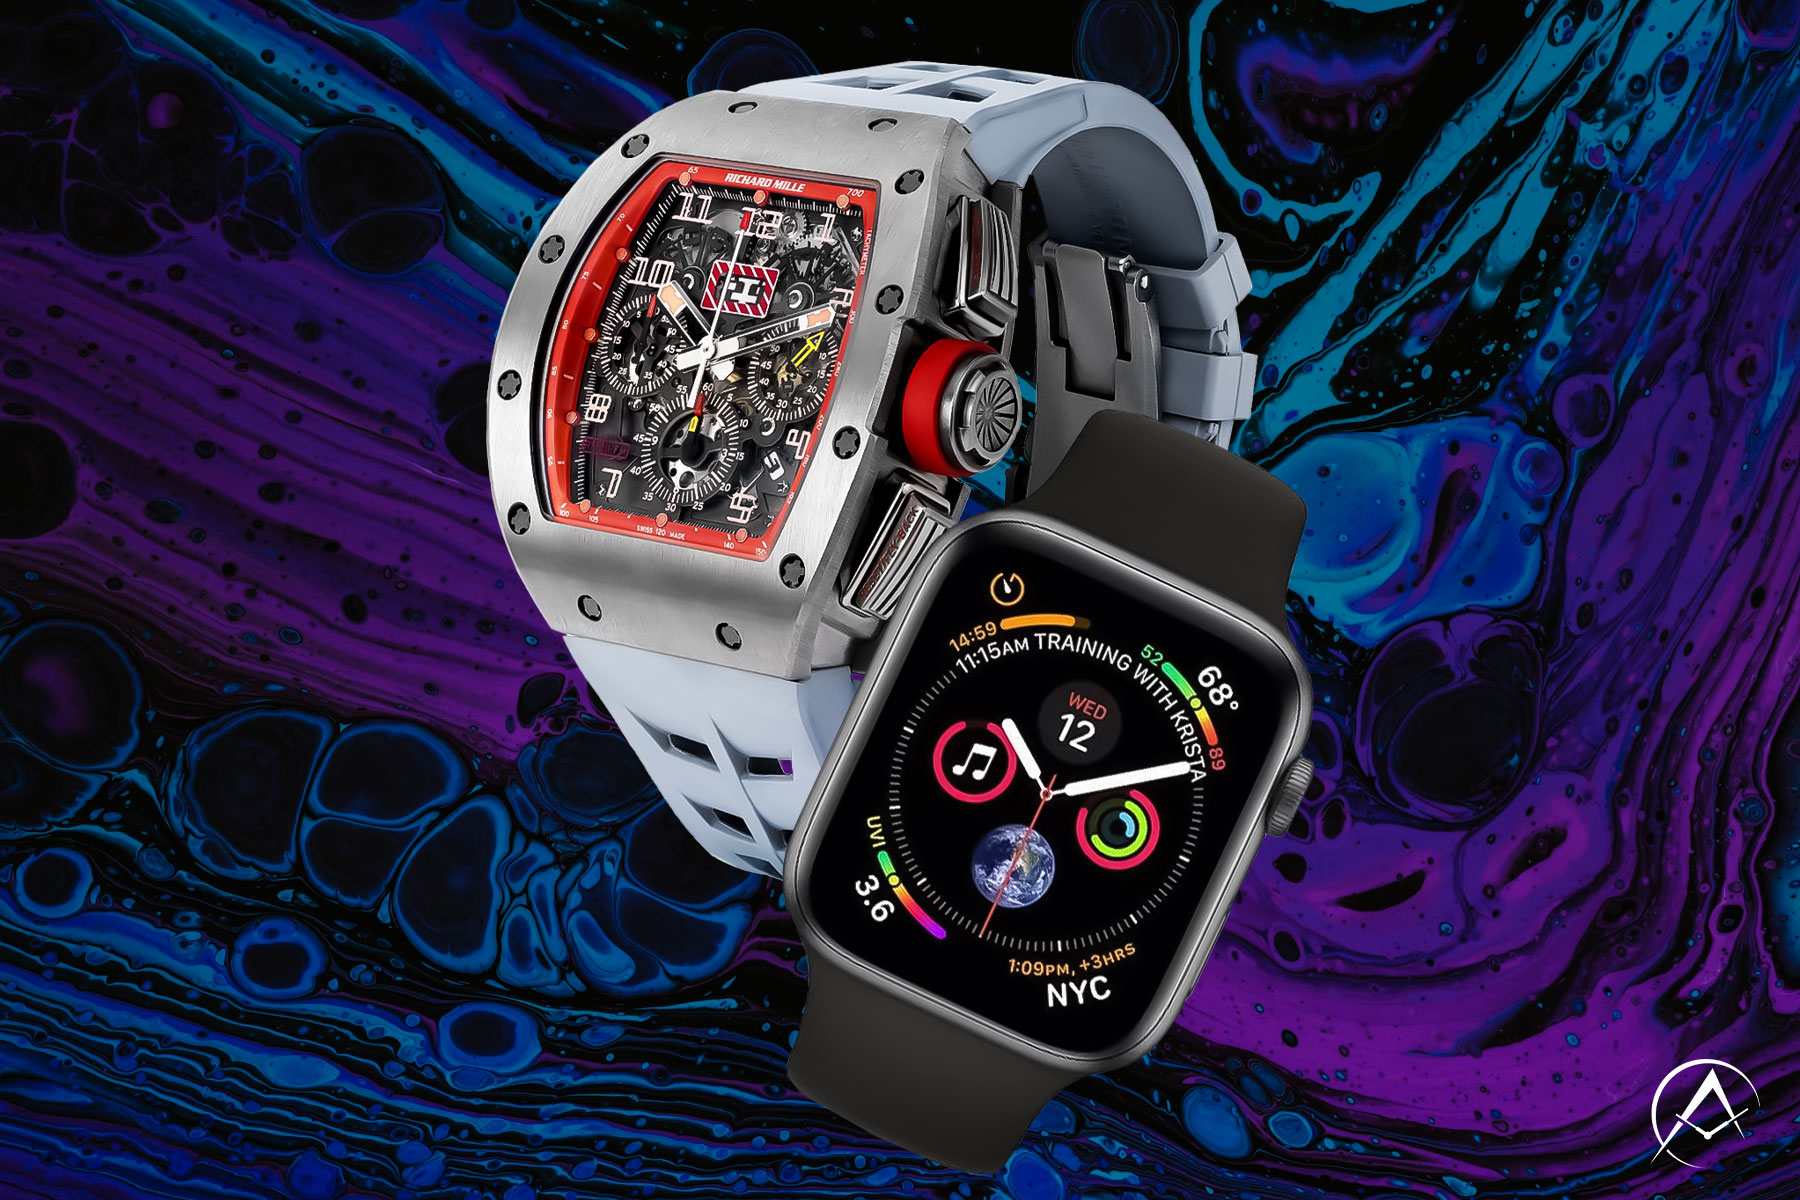 Richard Mille RM 011 Titanium Timepiece with Light Blue Rubber Strap Beside a Black Apple Ultra 2 Smartwatch on a Blue and Purple Background.